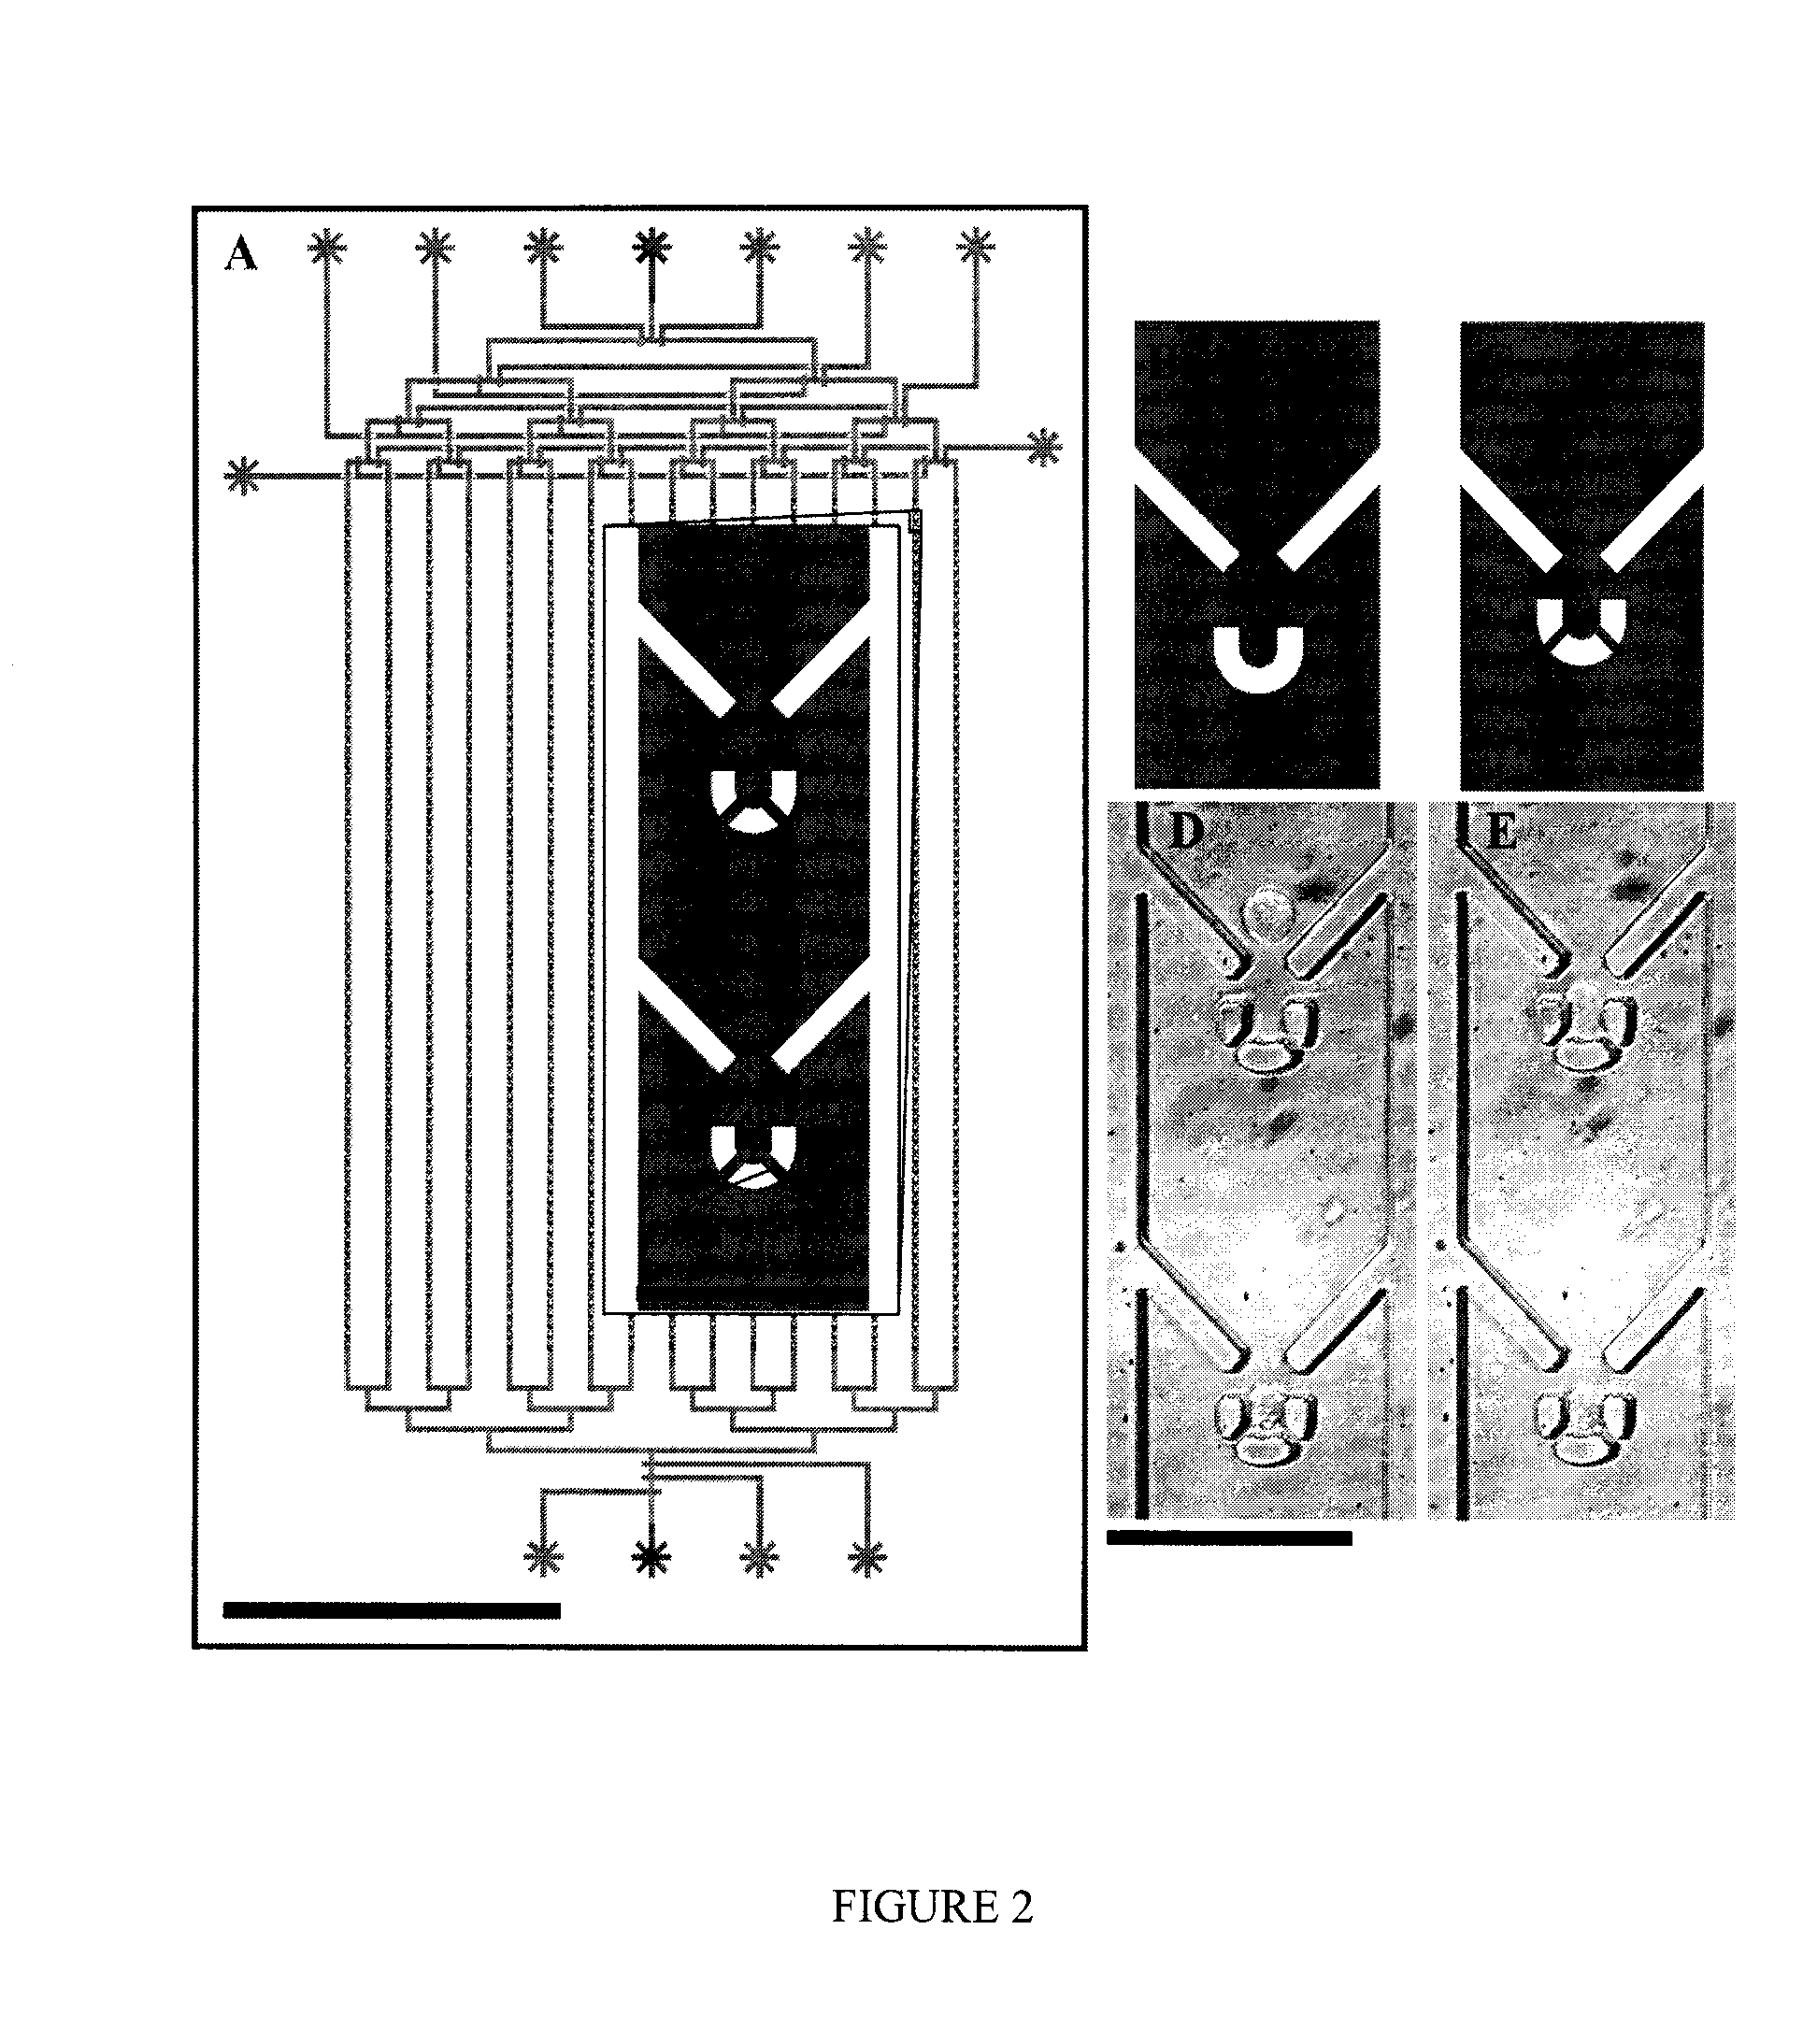 Microfluidic Cell Trap and Assay Apparatus for High-Throughput Analysis